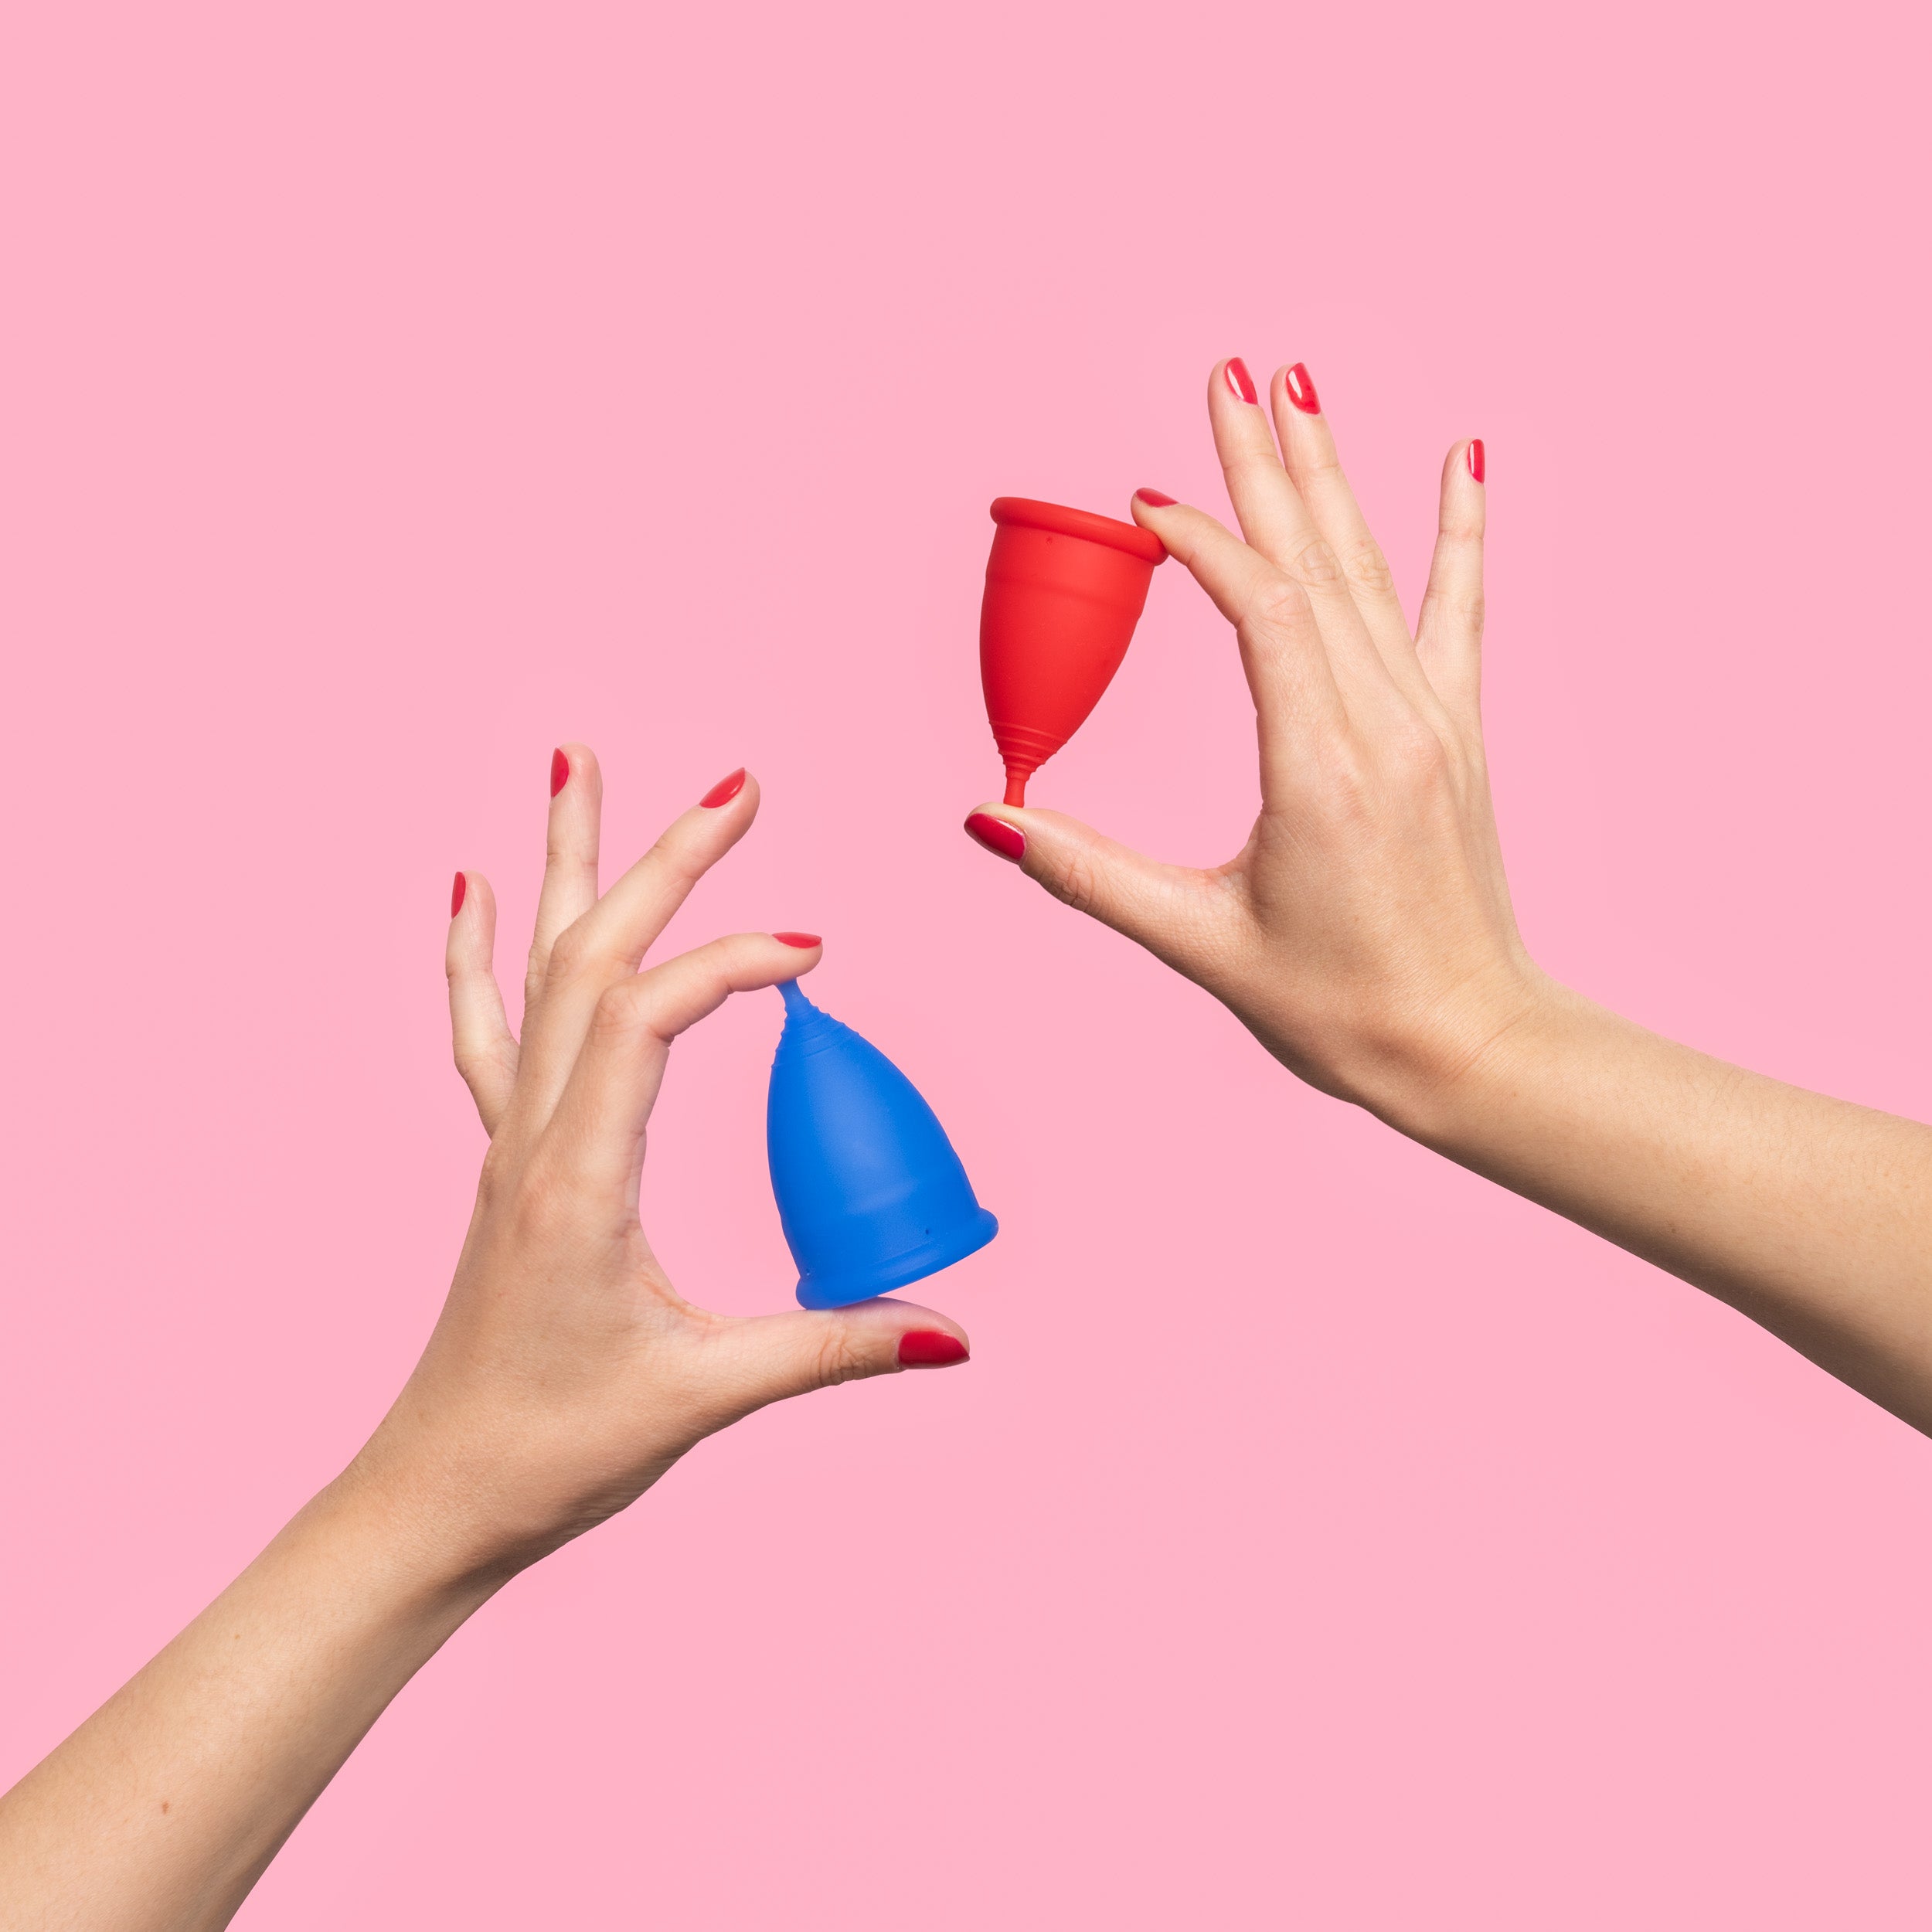 Menstrual Cup stuck? Easy step-by-step removal tips and tricks Moxie pic